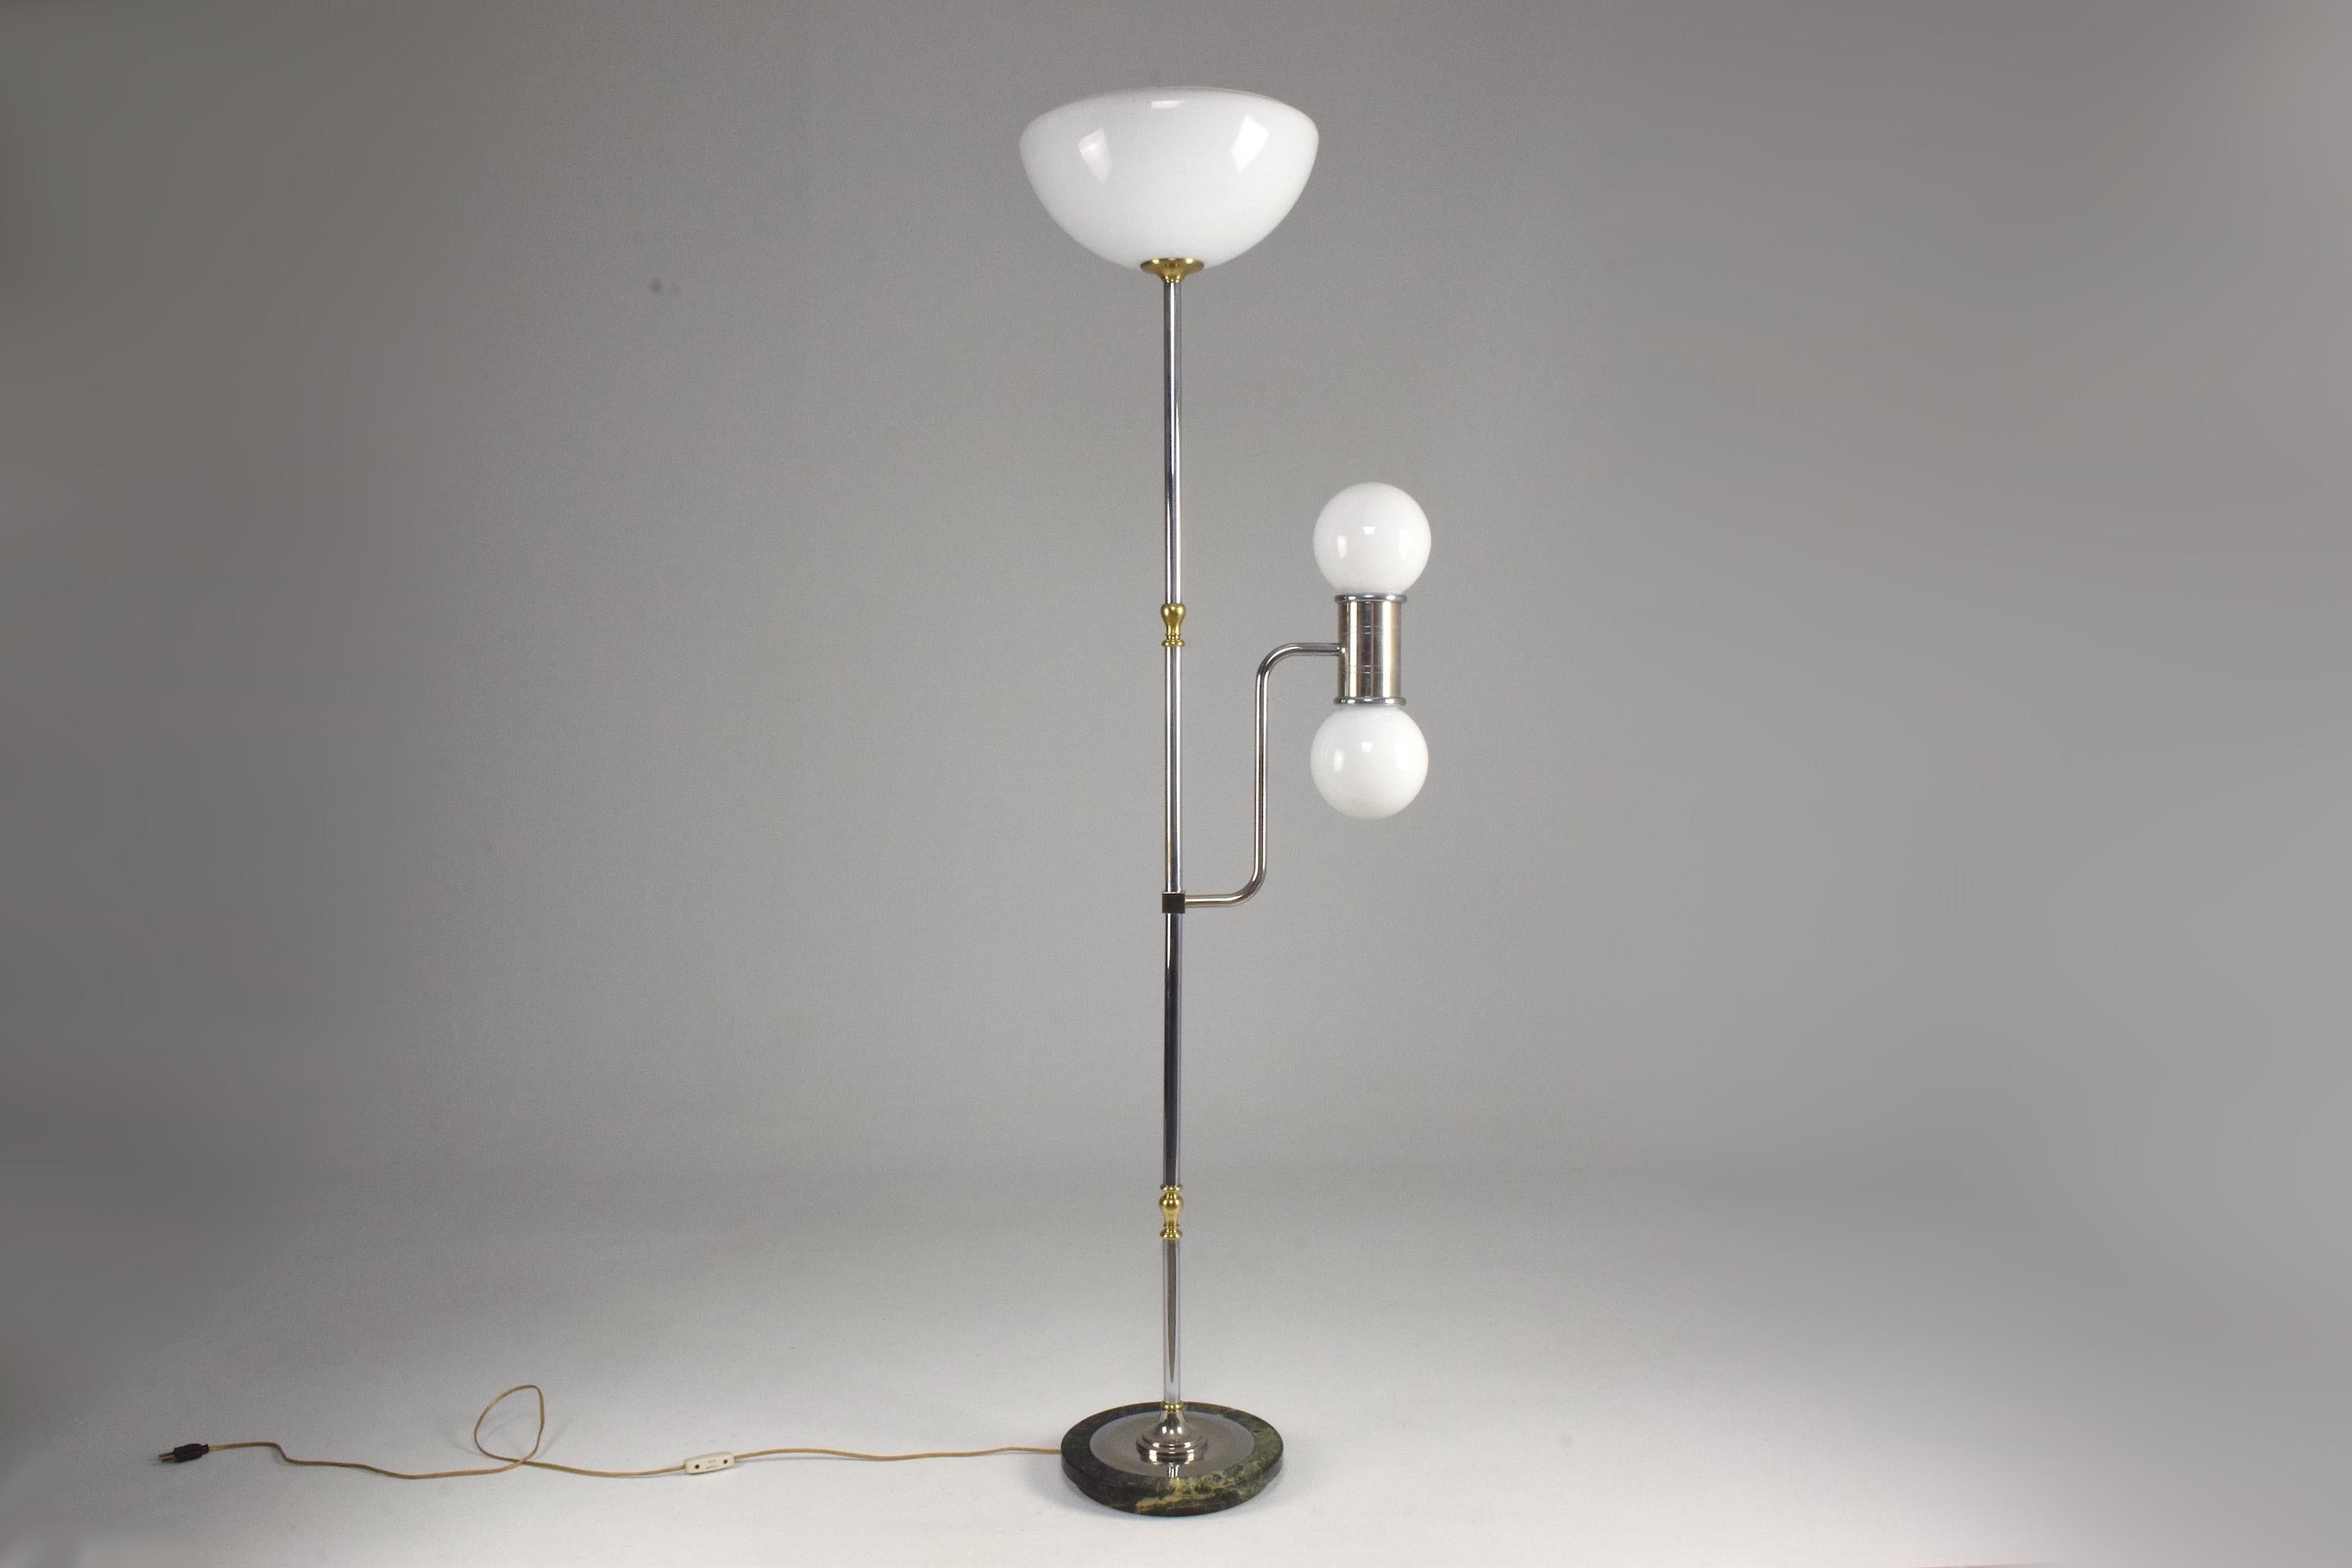 A stunning midcentury vintage floor lamp designed in chromed steel with two opaque Murano glass shades and a Guatemalan green circular base. The silver stem has polished brass details.
Labeled Vetri Murano.
Italy, circa 1950s.
----

All our pieces